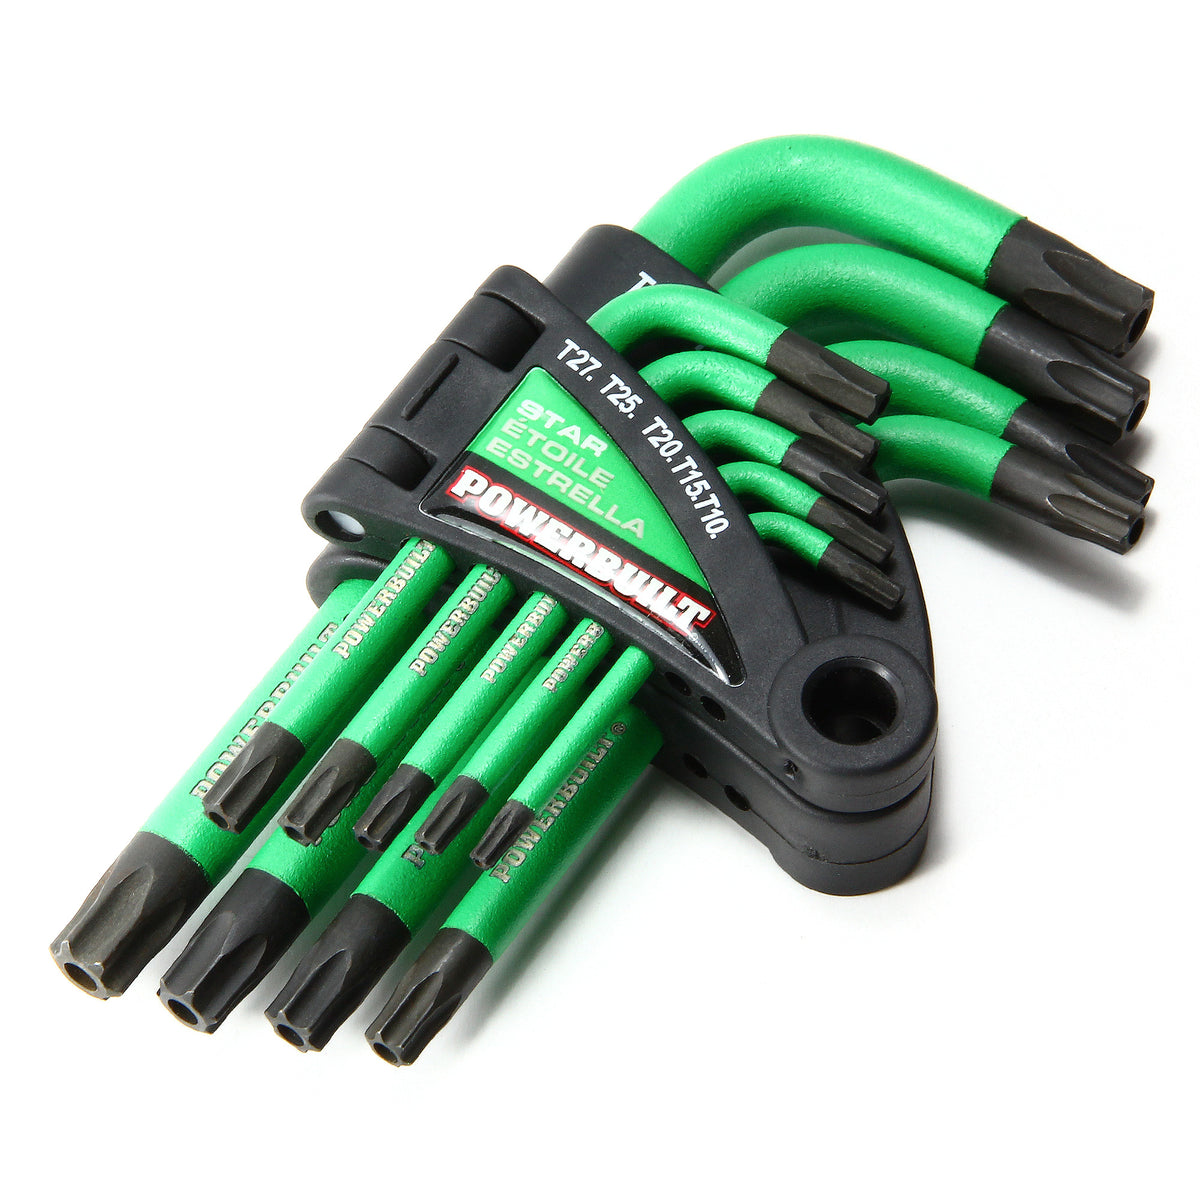 13 Piece Tamper Star Jumbo Long Point Magnetic Hex Key